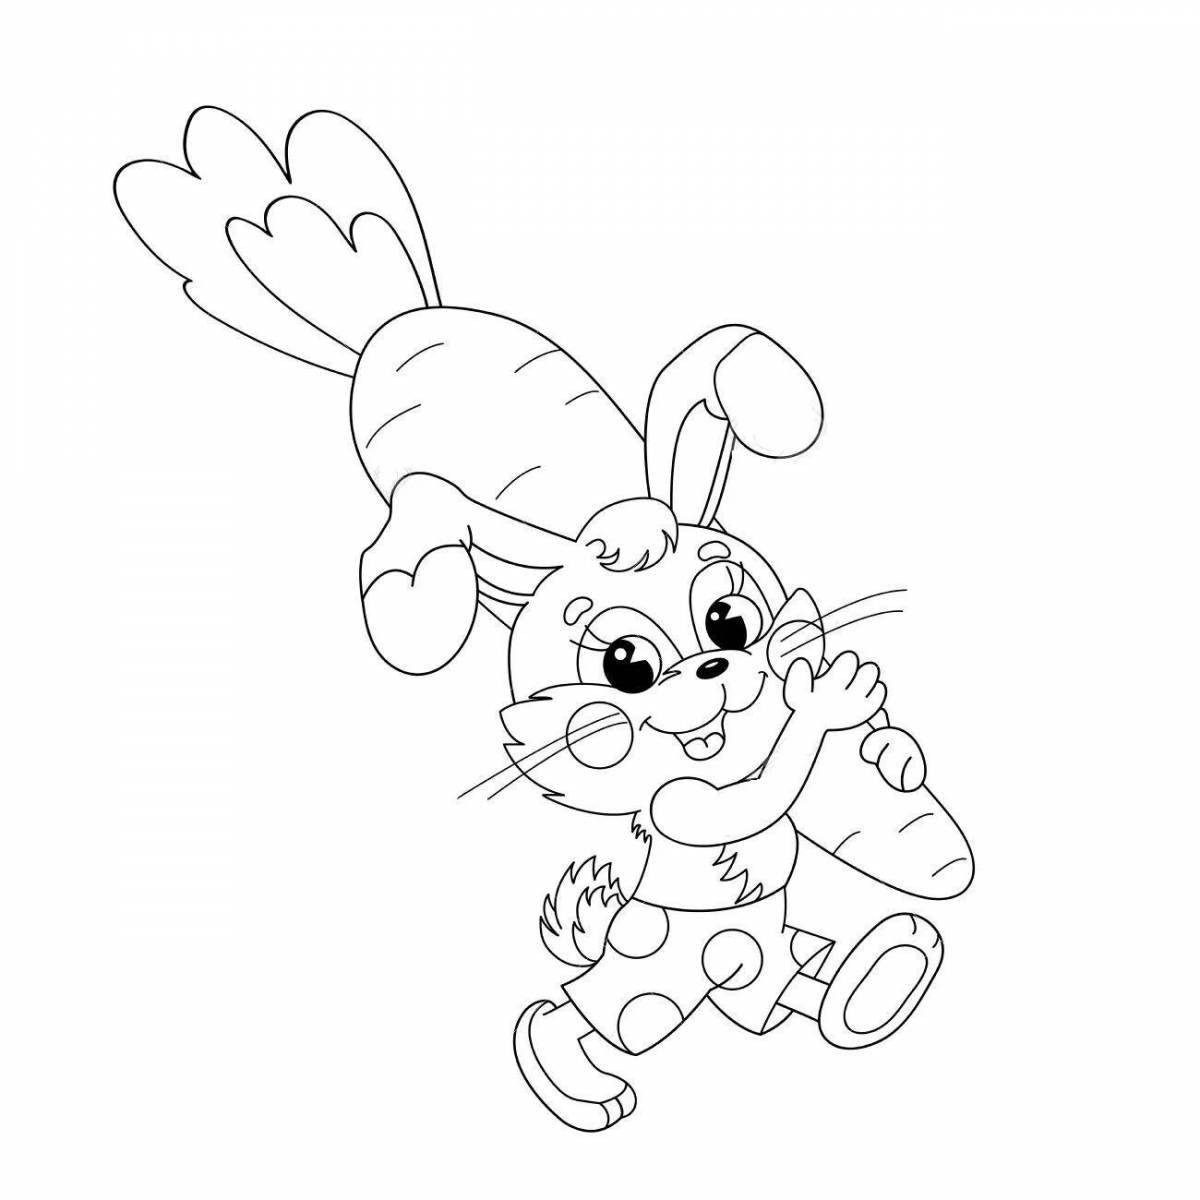 Carrot funny rabbit coloring book